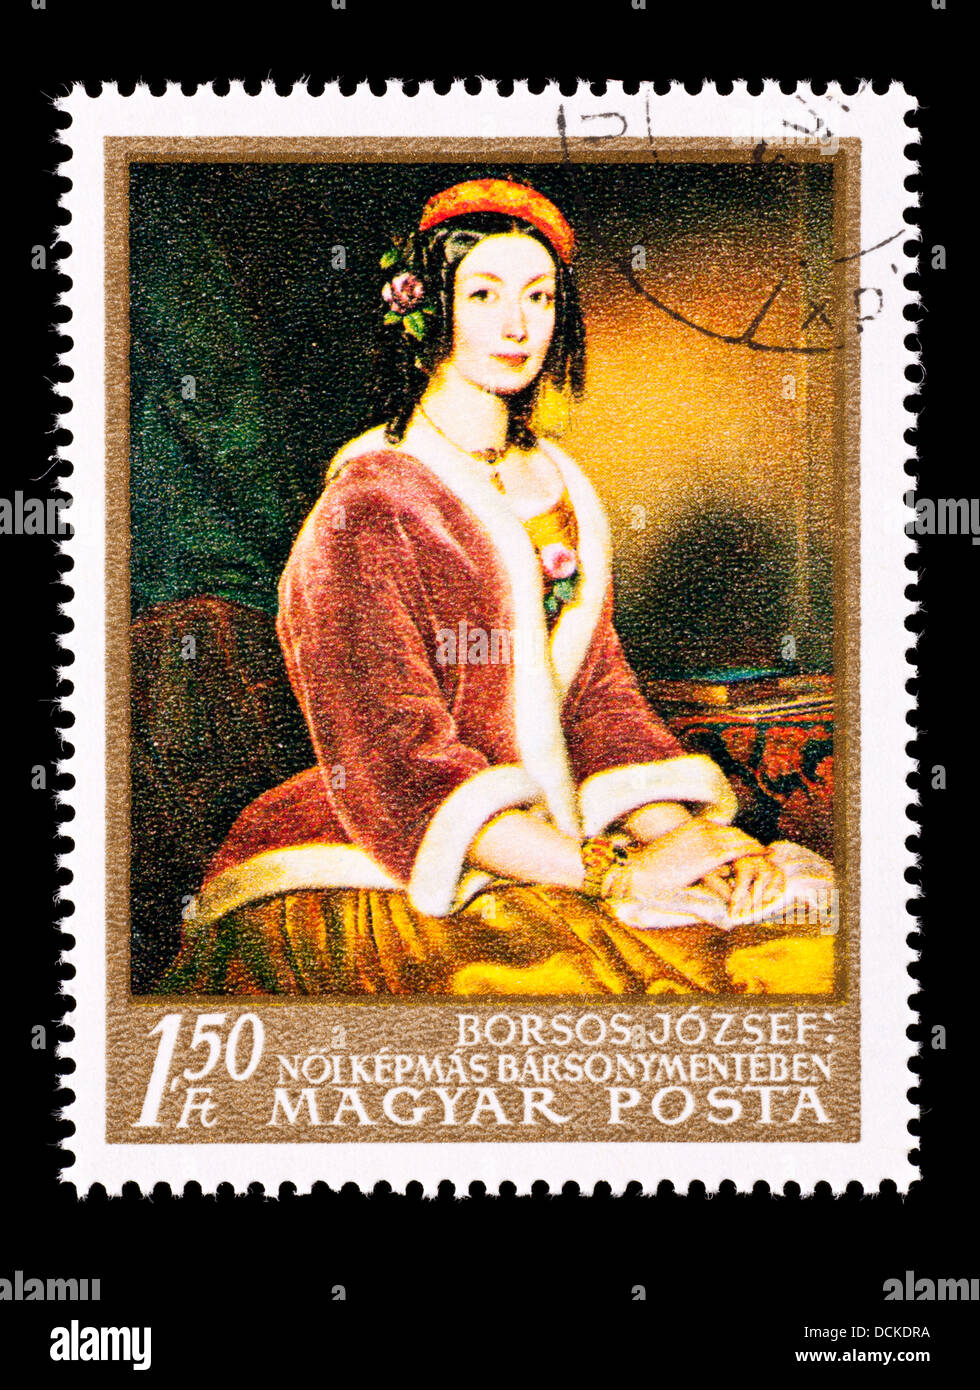 Postage stamp from Hungary depicting the painting "Lady in Fur-lined Jacket" by Jozsef Borsos. Stock Photo